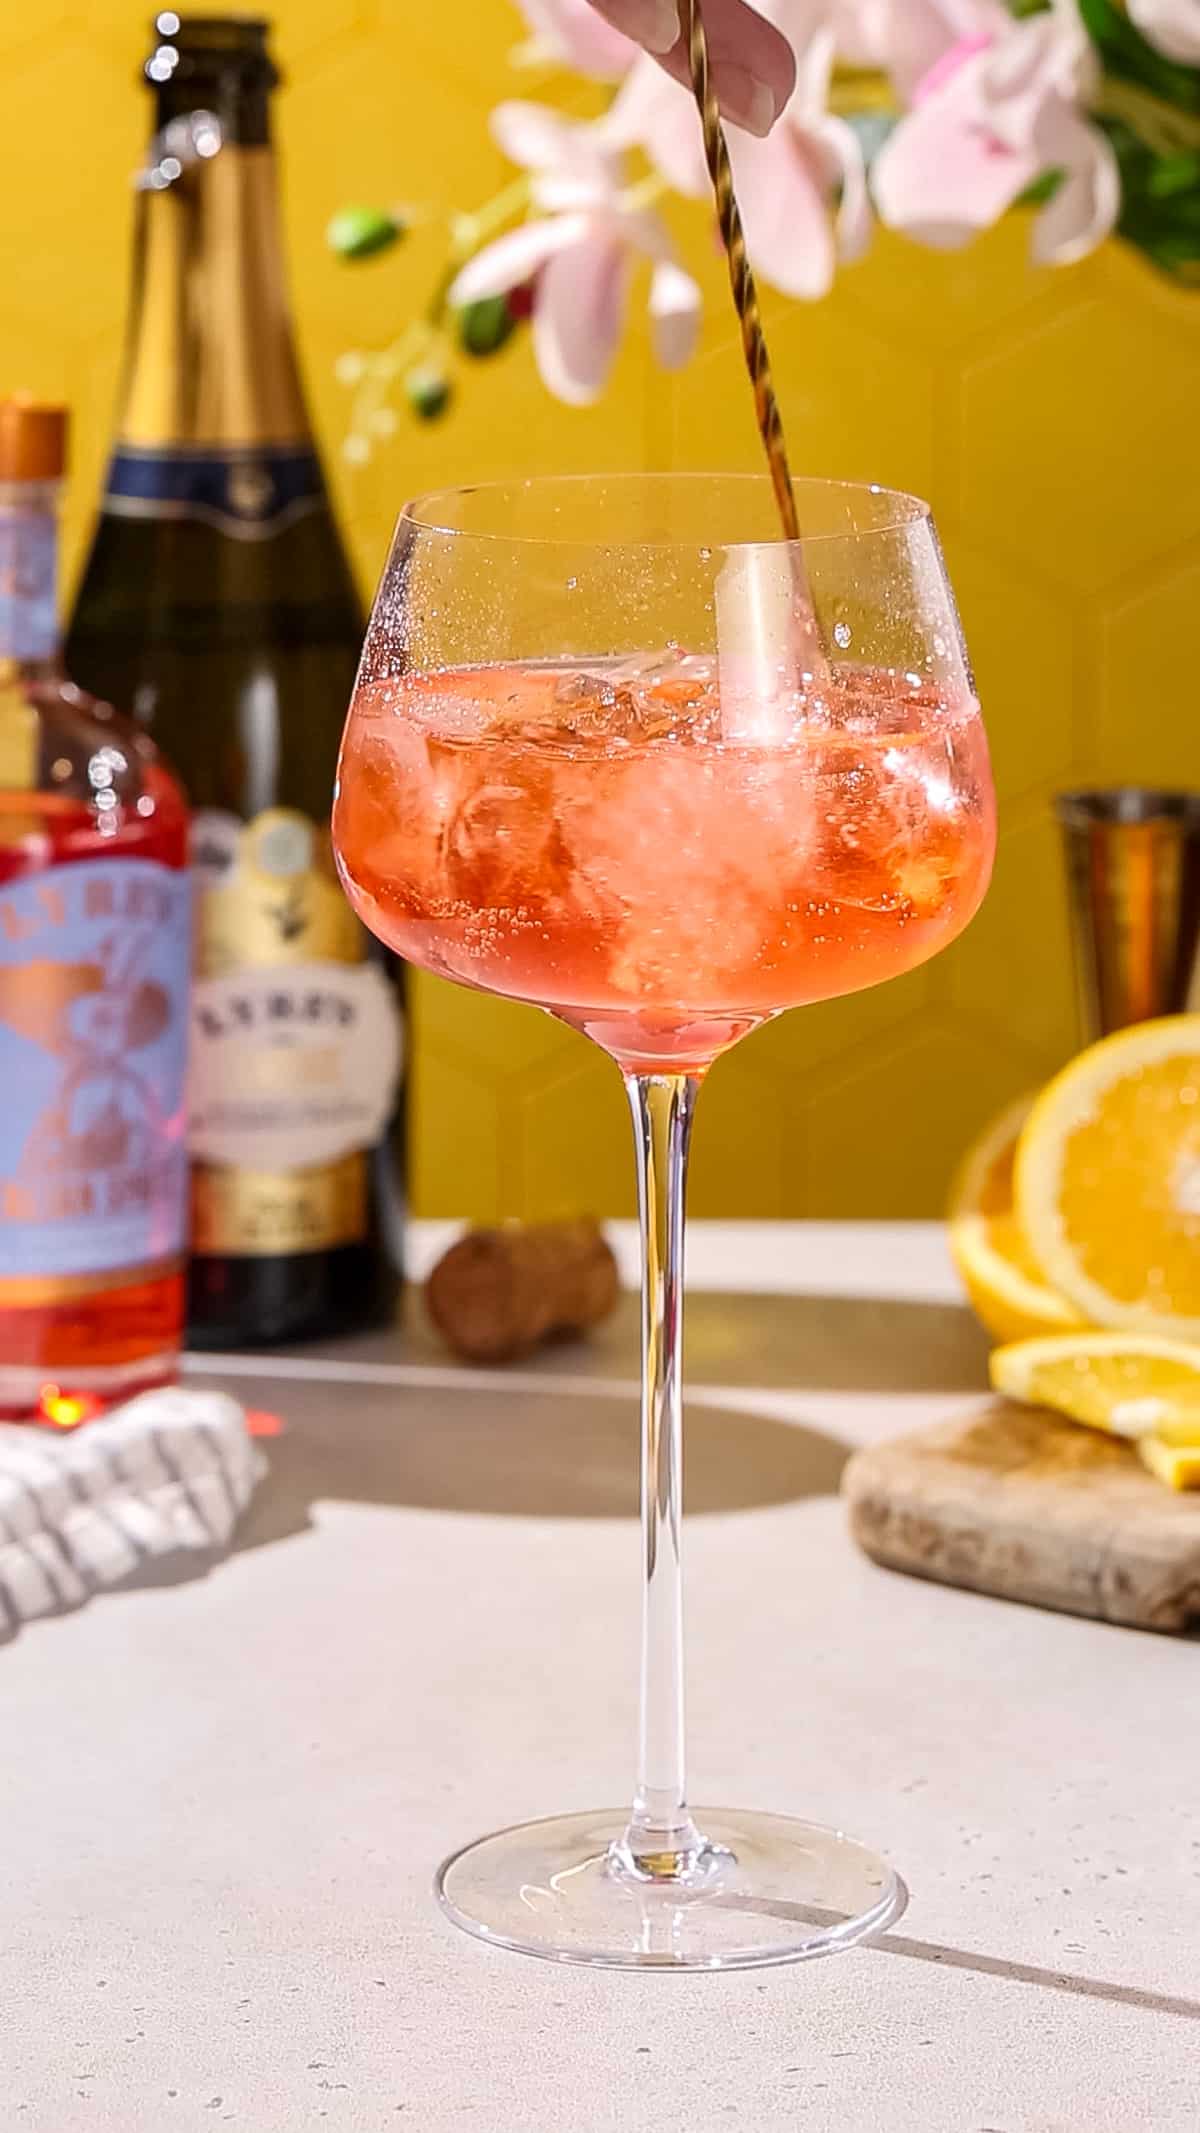 Hand using a long bar spoon to gently stir a spritz cocktail.